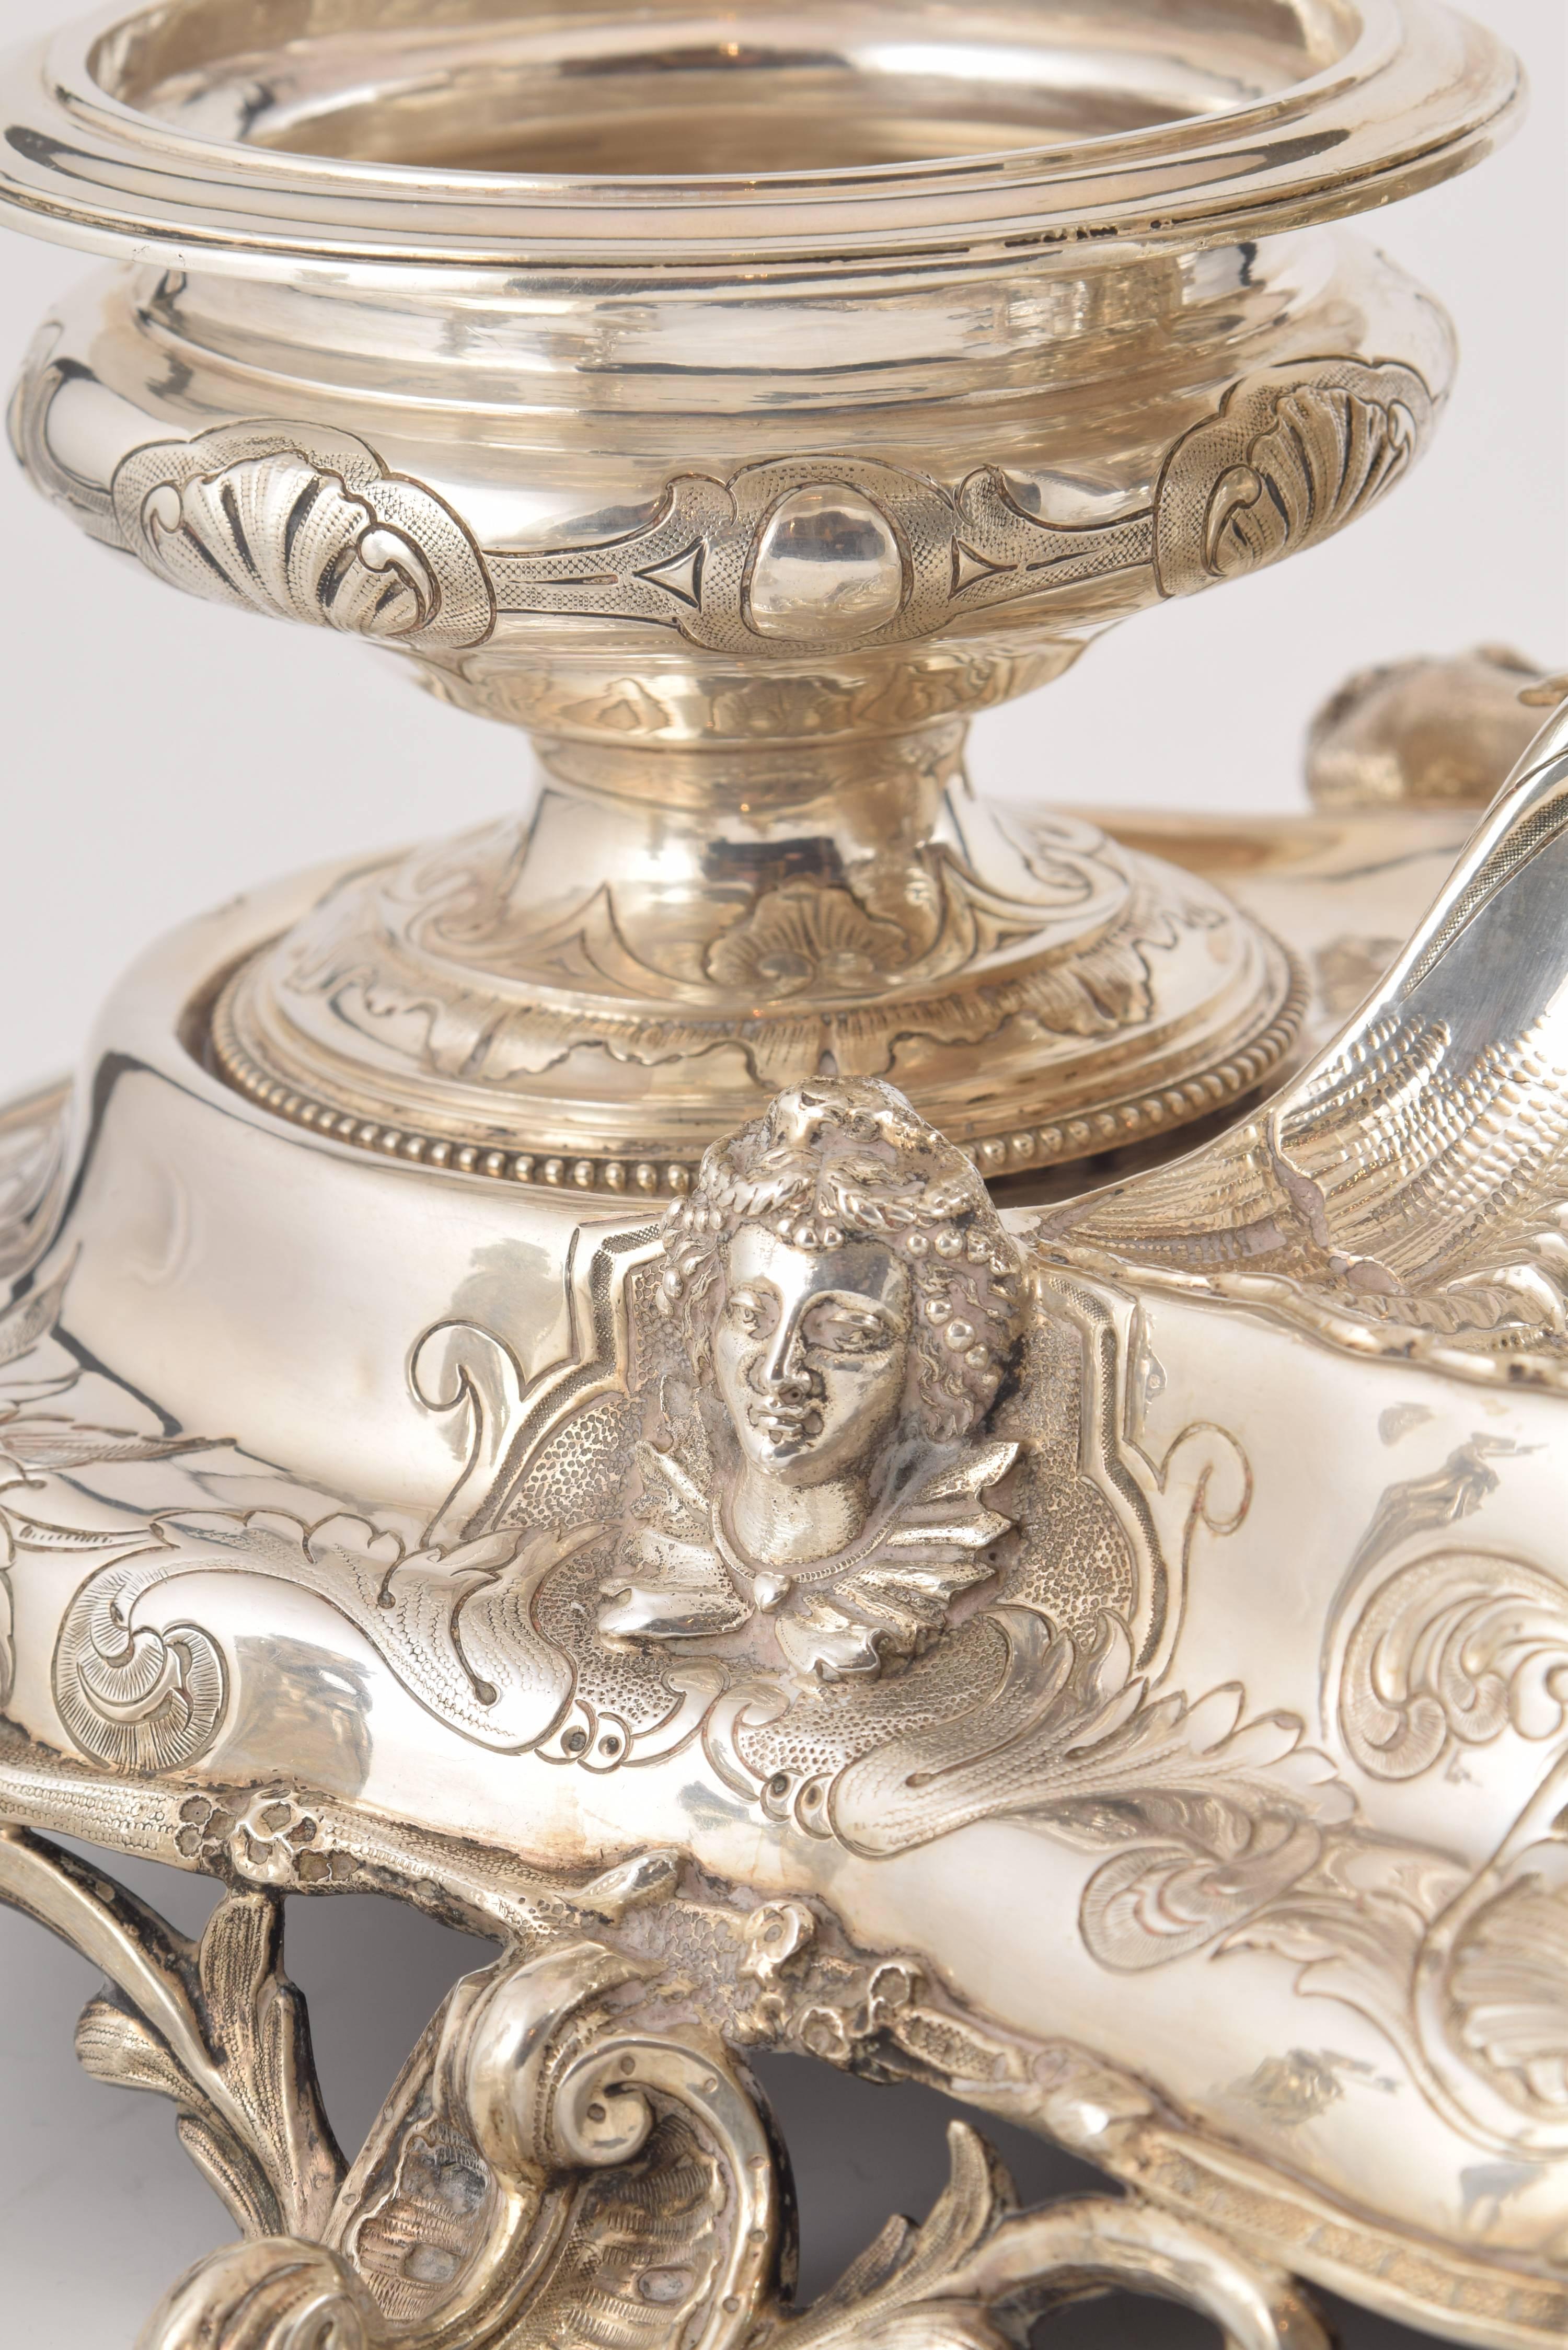 Solid Silver Writing Set with Clock, France, 19th Century with Hallmarks 2